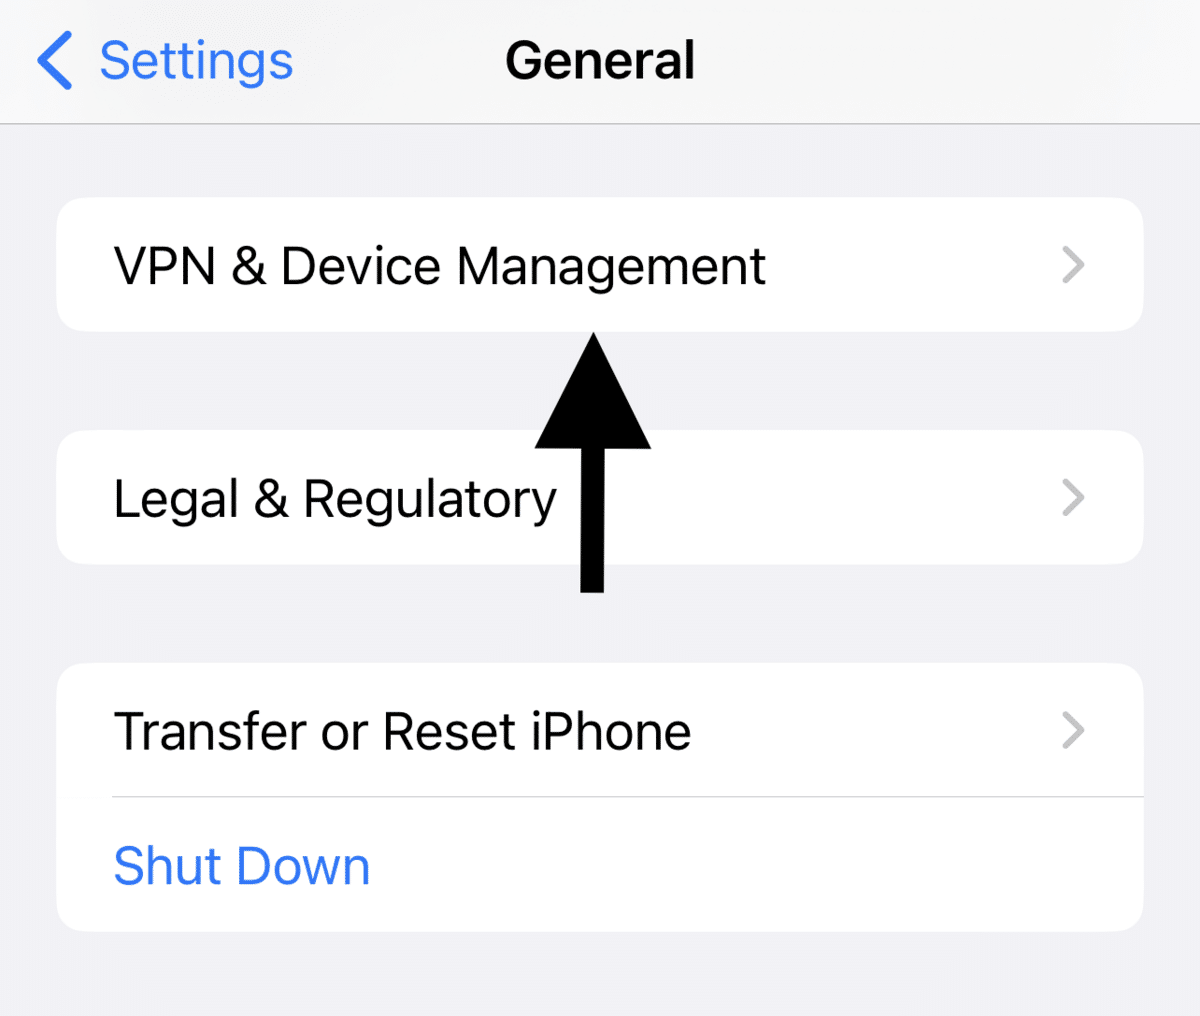 Turn off VPN to fix Apple App Store “Payment Not Completed” or “Your Purchase Could Not Be Completed” errors on iPhone, macOS, or iPad